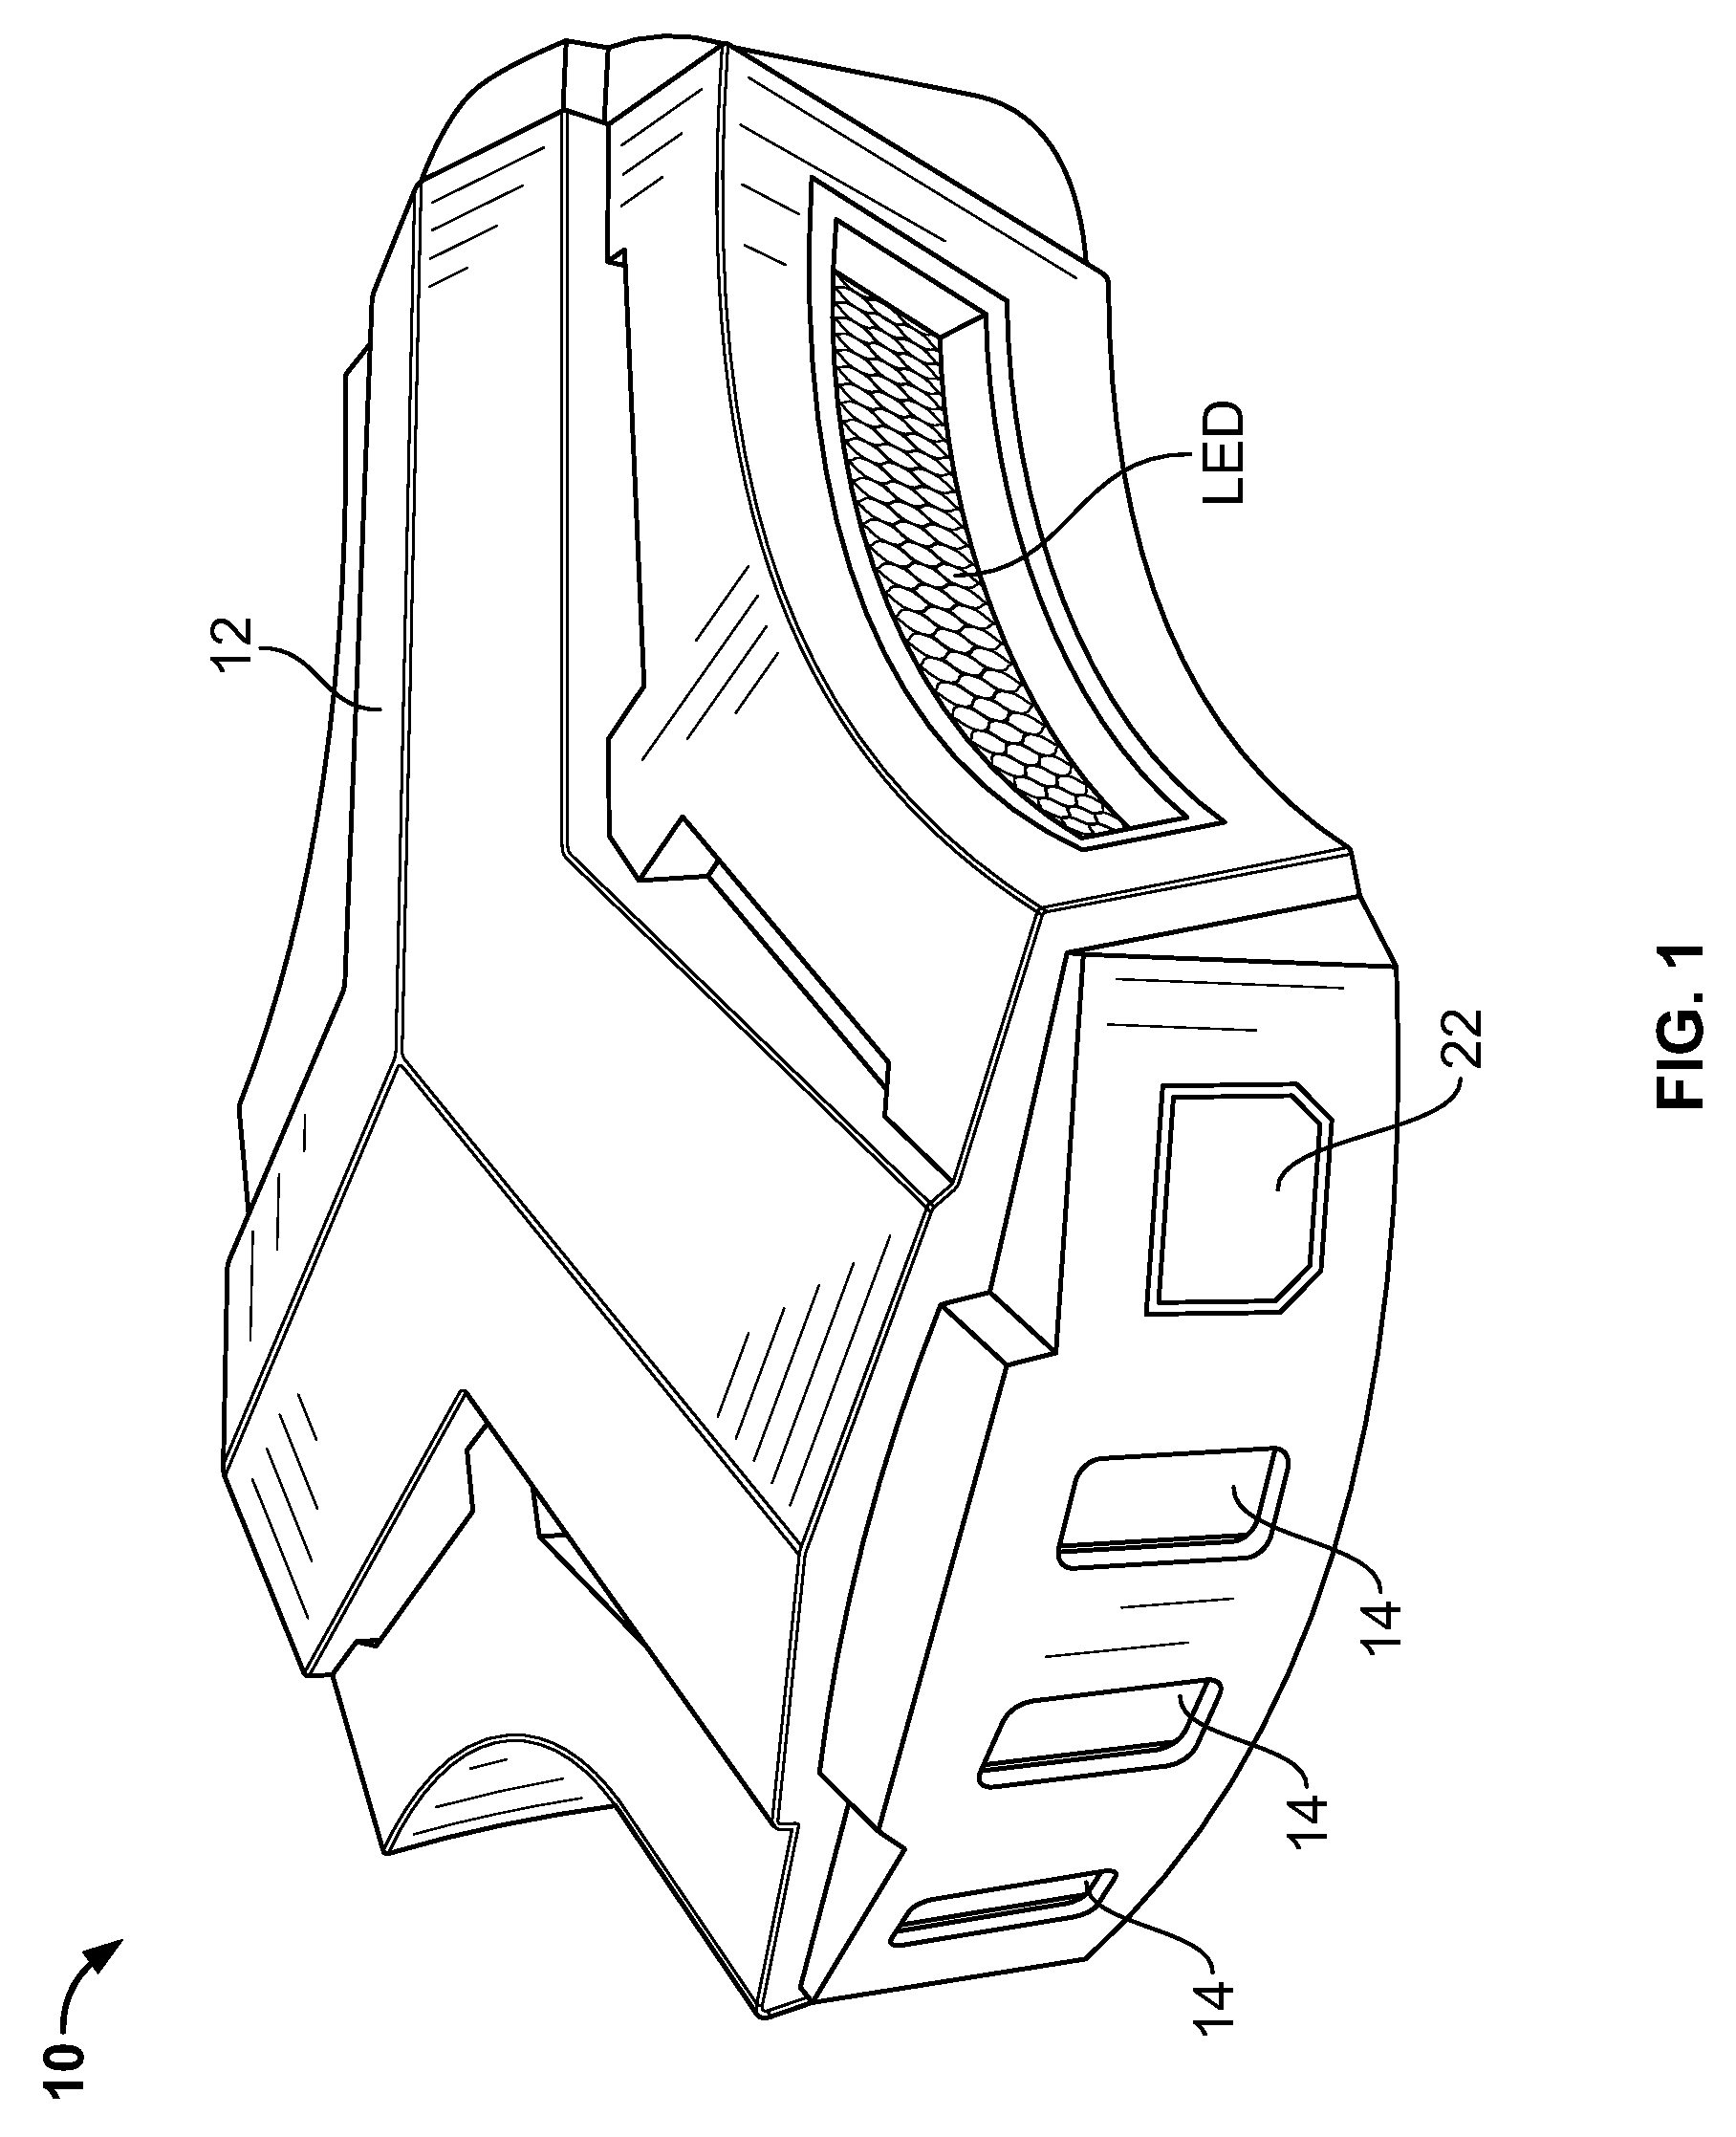 Portable multi-device power supply, battery charger, and docking system